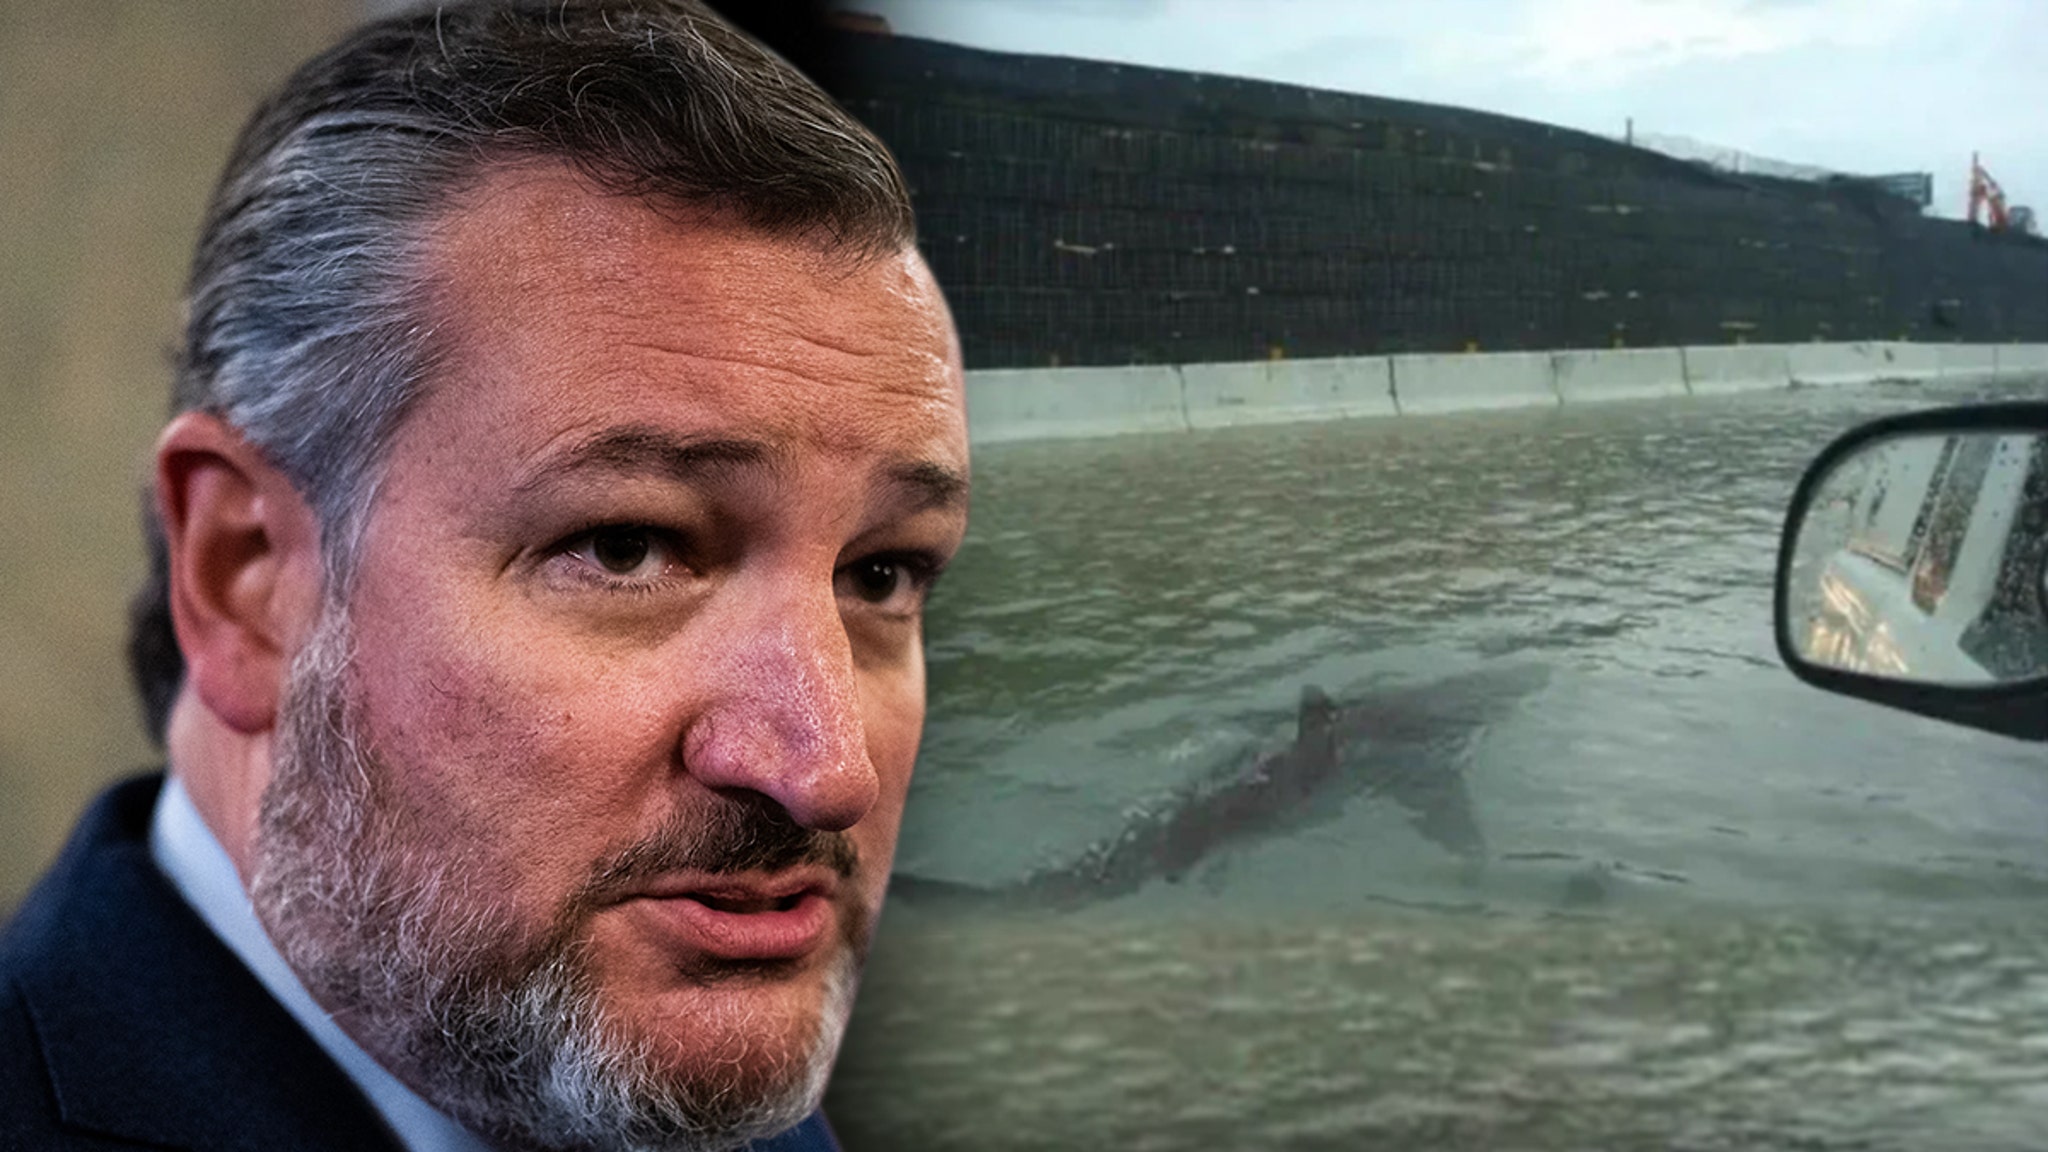 Sen. Ted Cruz Believed Sharks Were Swimming L.A. Streets During Hurricane Hilary thumbnail